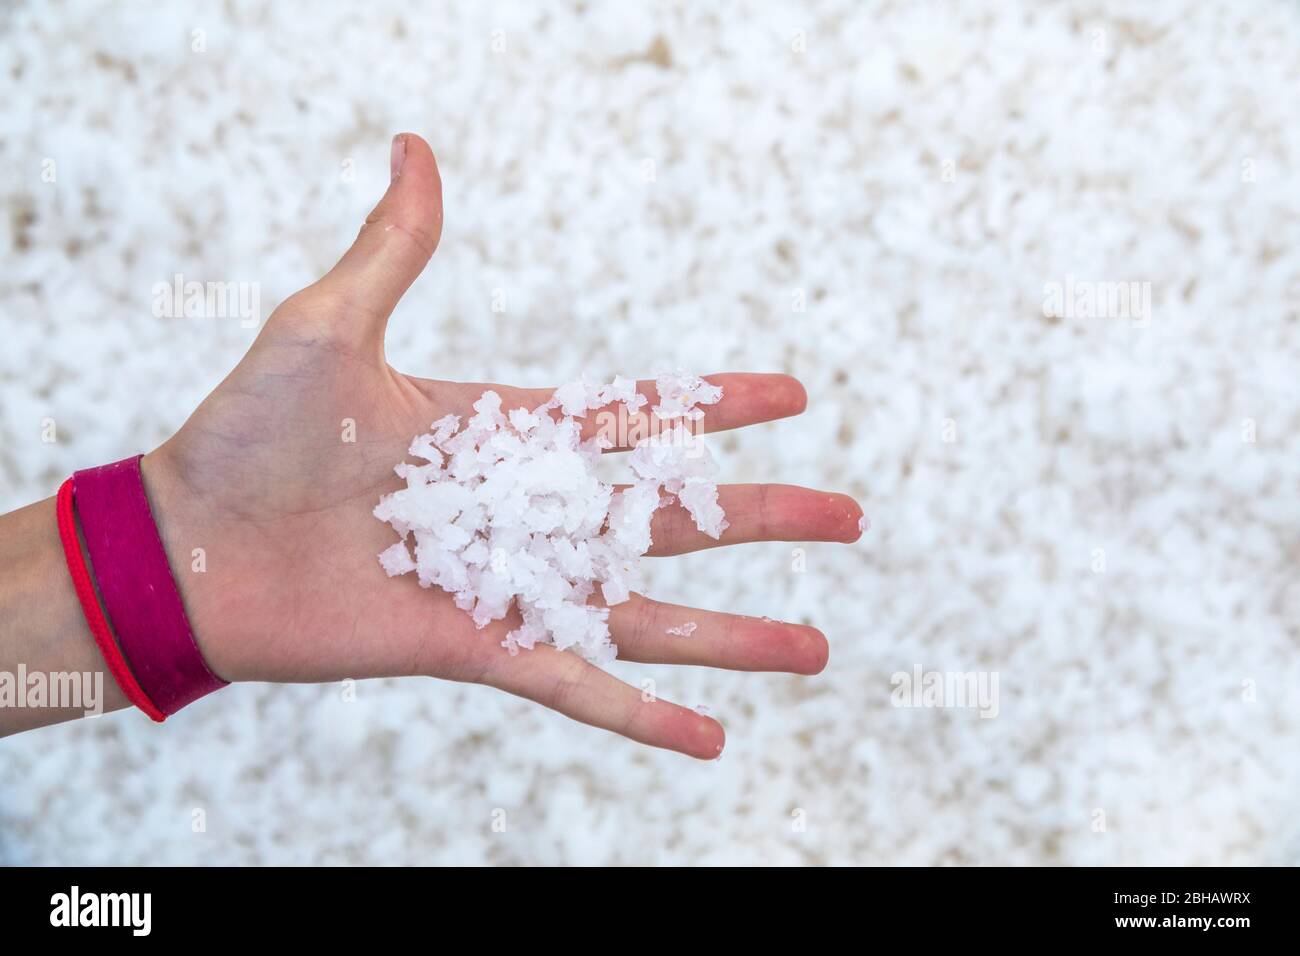 salt collected in the hands, the finished product of the nin salt pans, Nin, Dalmatia, Zadar country, Croatia Stock Photo